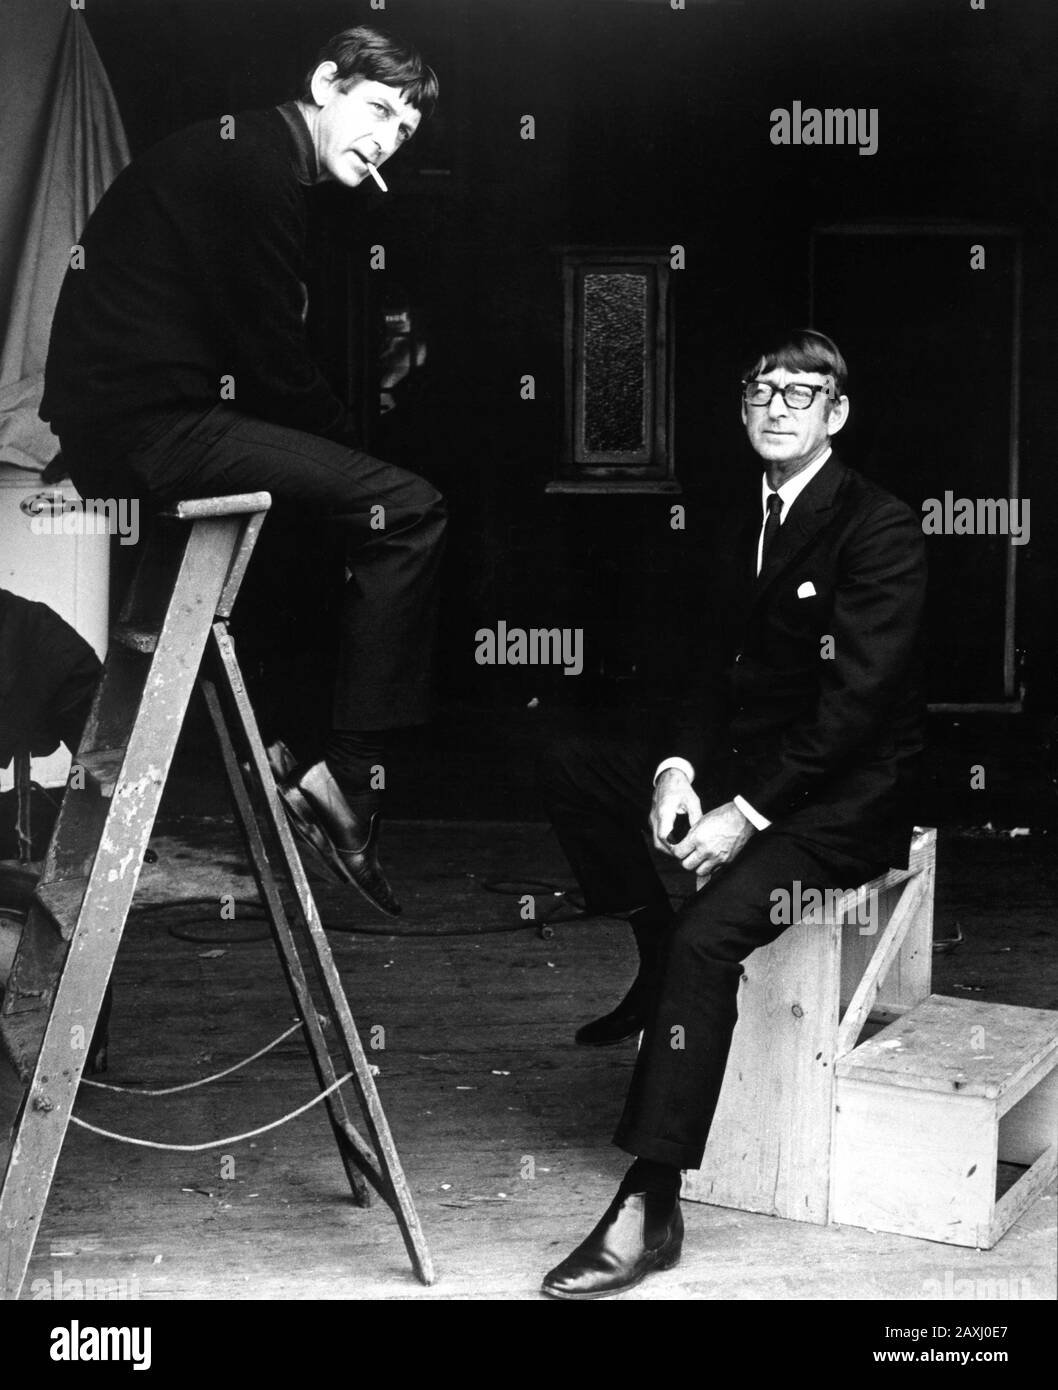 Producer / Directors ROY BOULTING ( on ladder ) and JOHN BOULTING on set candid during filming of THE FAMILY WAY 1966 play / screenplay Bill Naughton The Boulting Brothers Production / Jambox / BLC Films / British Lion Film Corporation Stock Photo